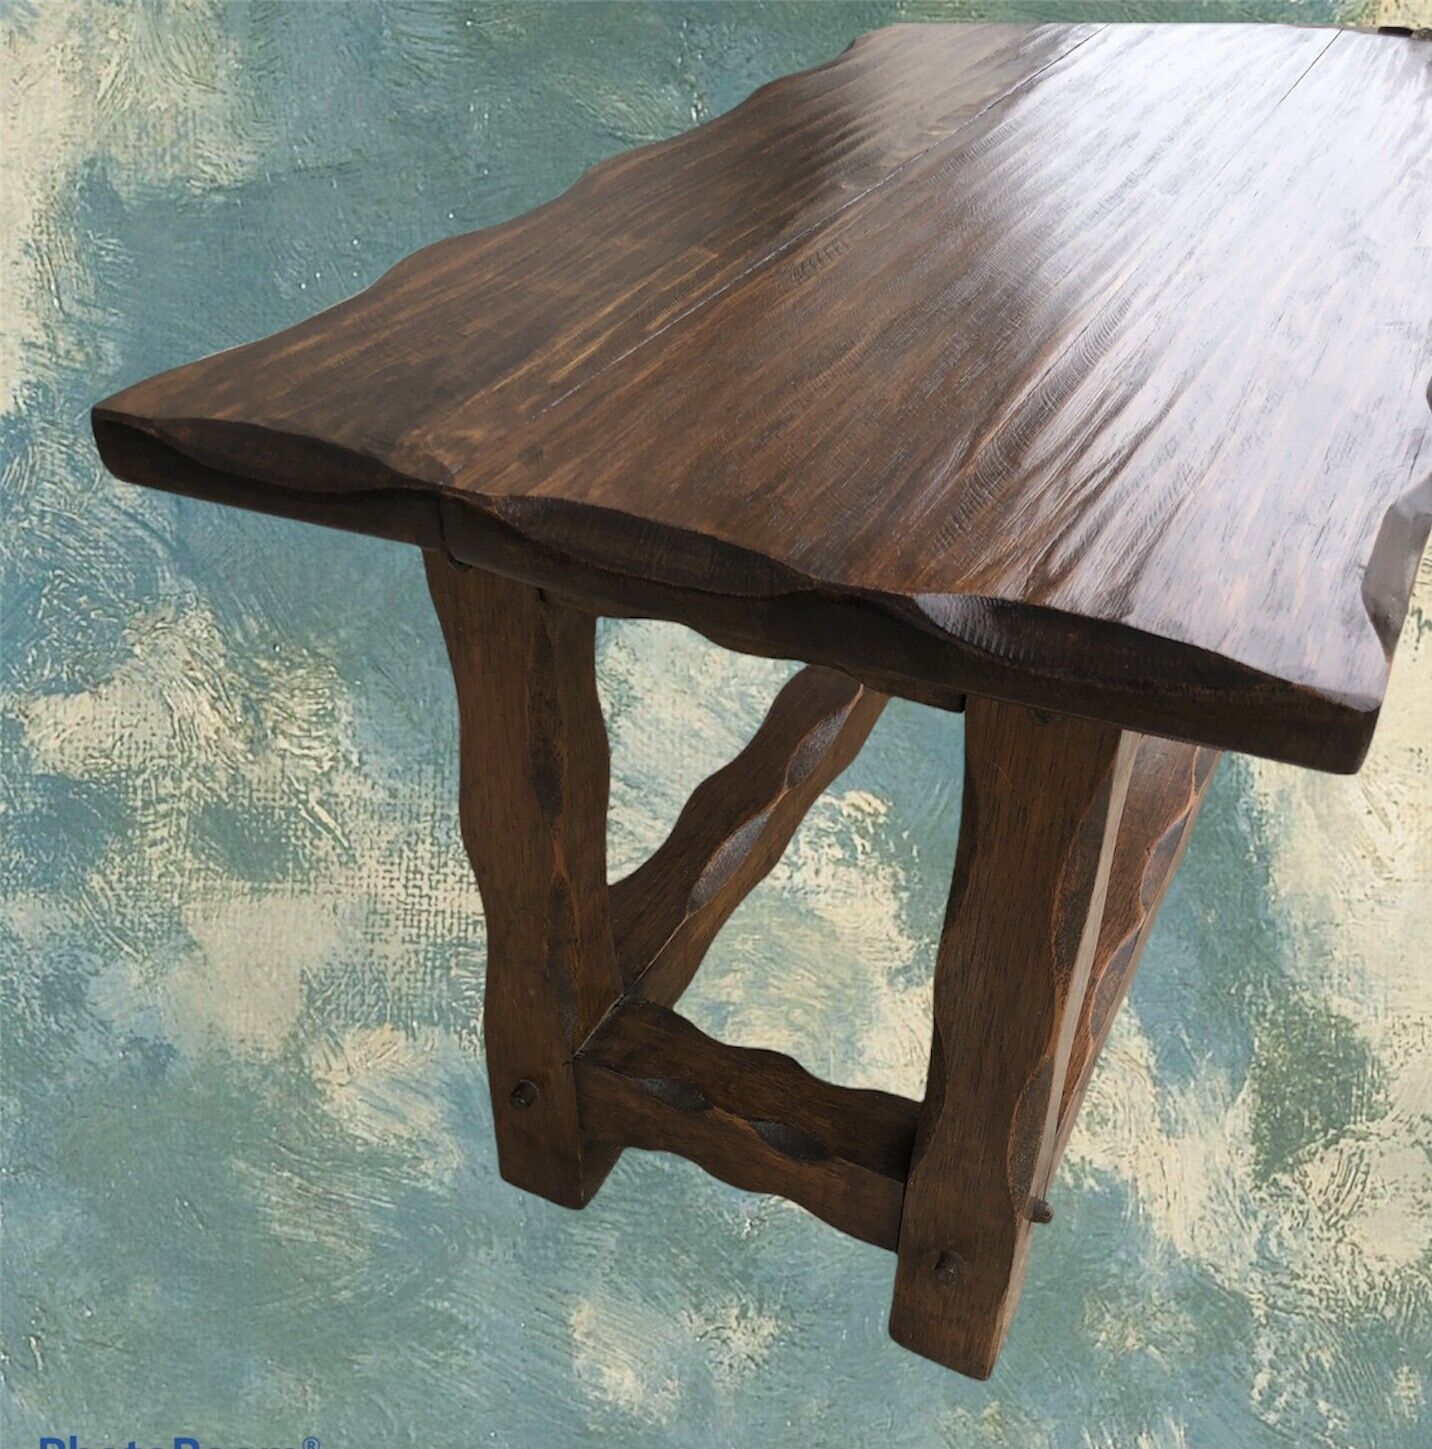 061.....Arts And Crafts Small Oak Coffee Table (sold)